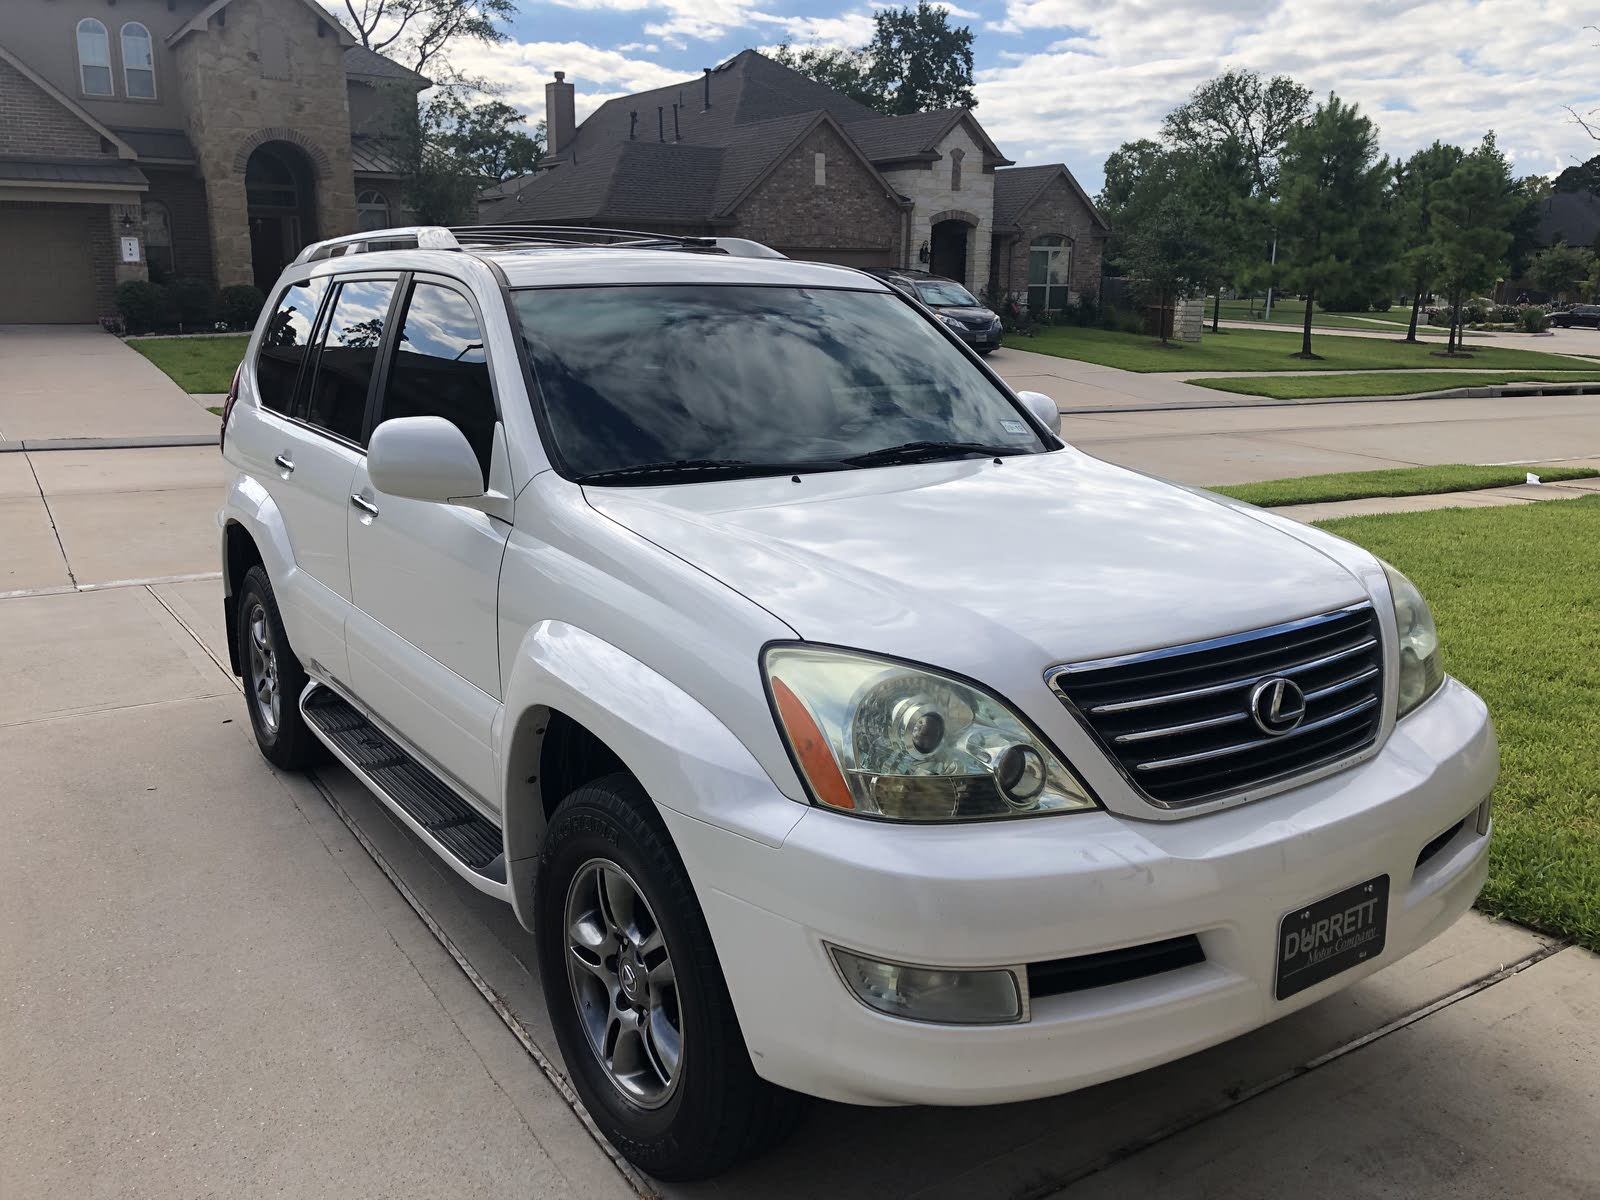 Lexus GX 470 Questions - I listed my Lexus GX470 2009 and Don’t see it